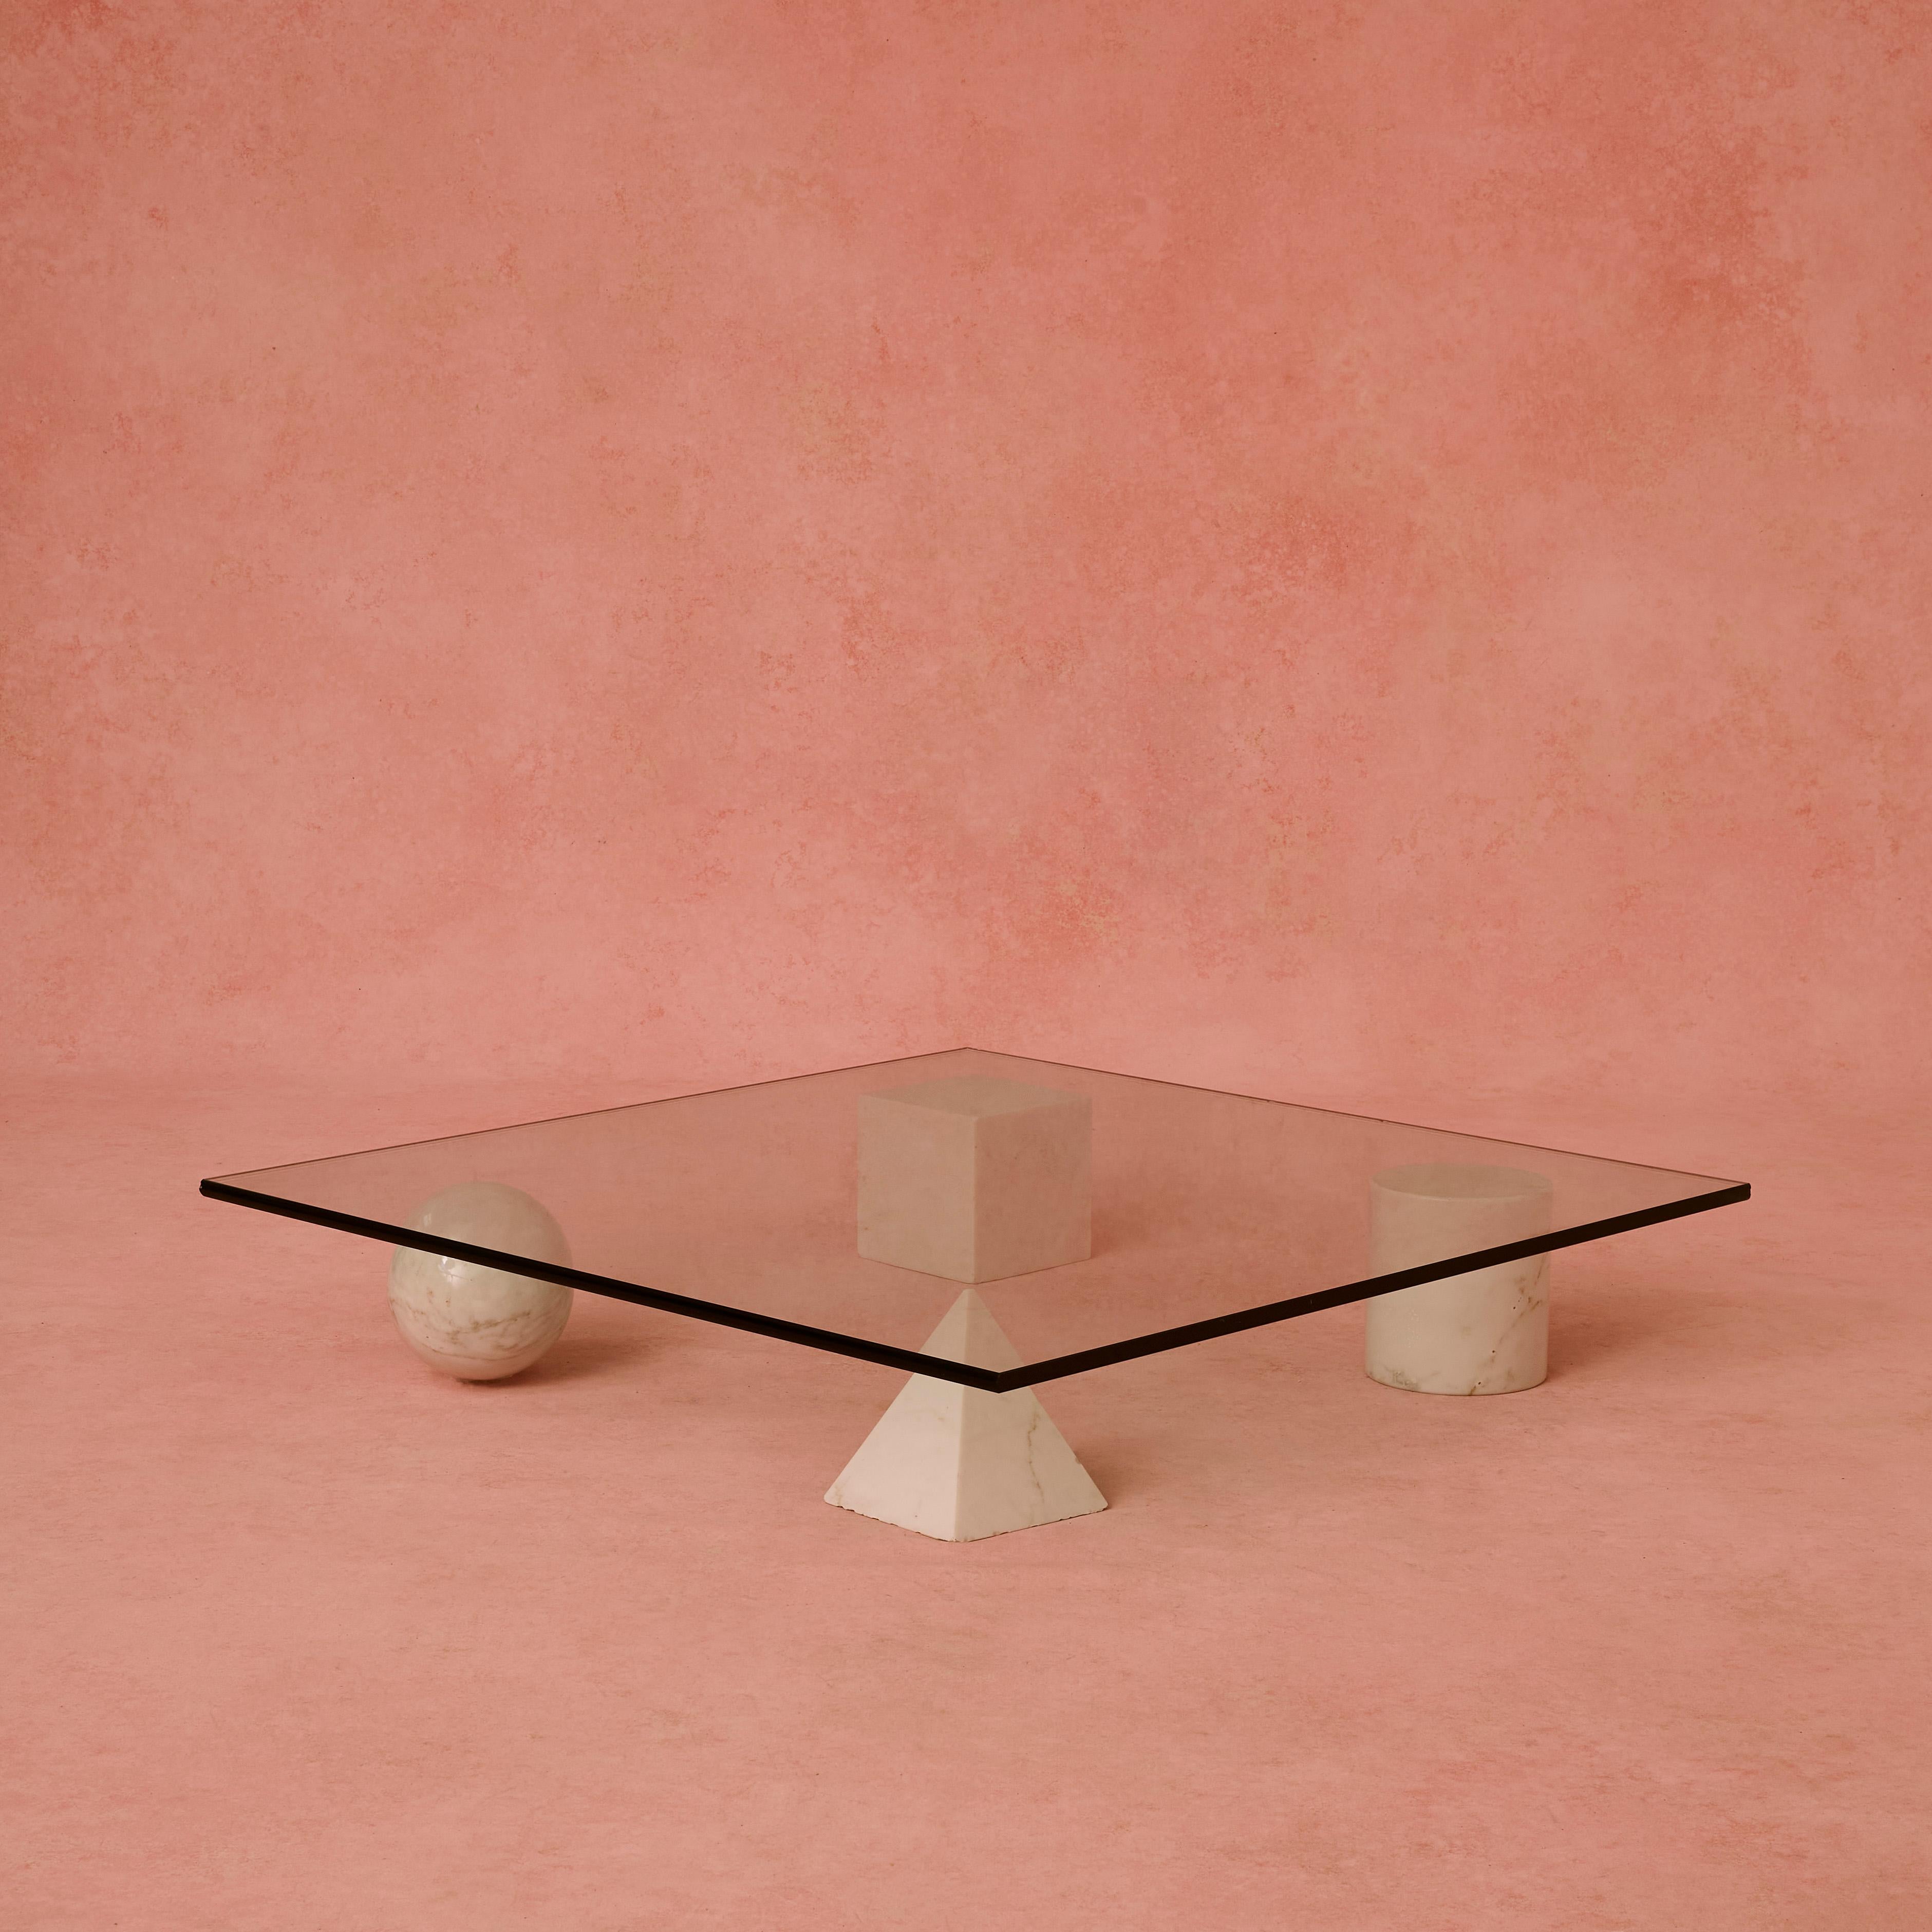 Massimo & Lella Vignelli, 'Metafora' coffee table, Casigliani, Italy, 1970s
The four forms of the geometry, the cube, the cylinder, the sphere and the pyramid, made of white marble, represent the basis of the table finished with a heavy top sheet